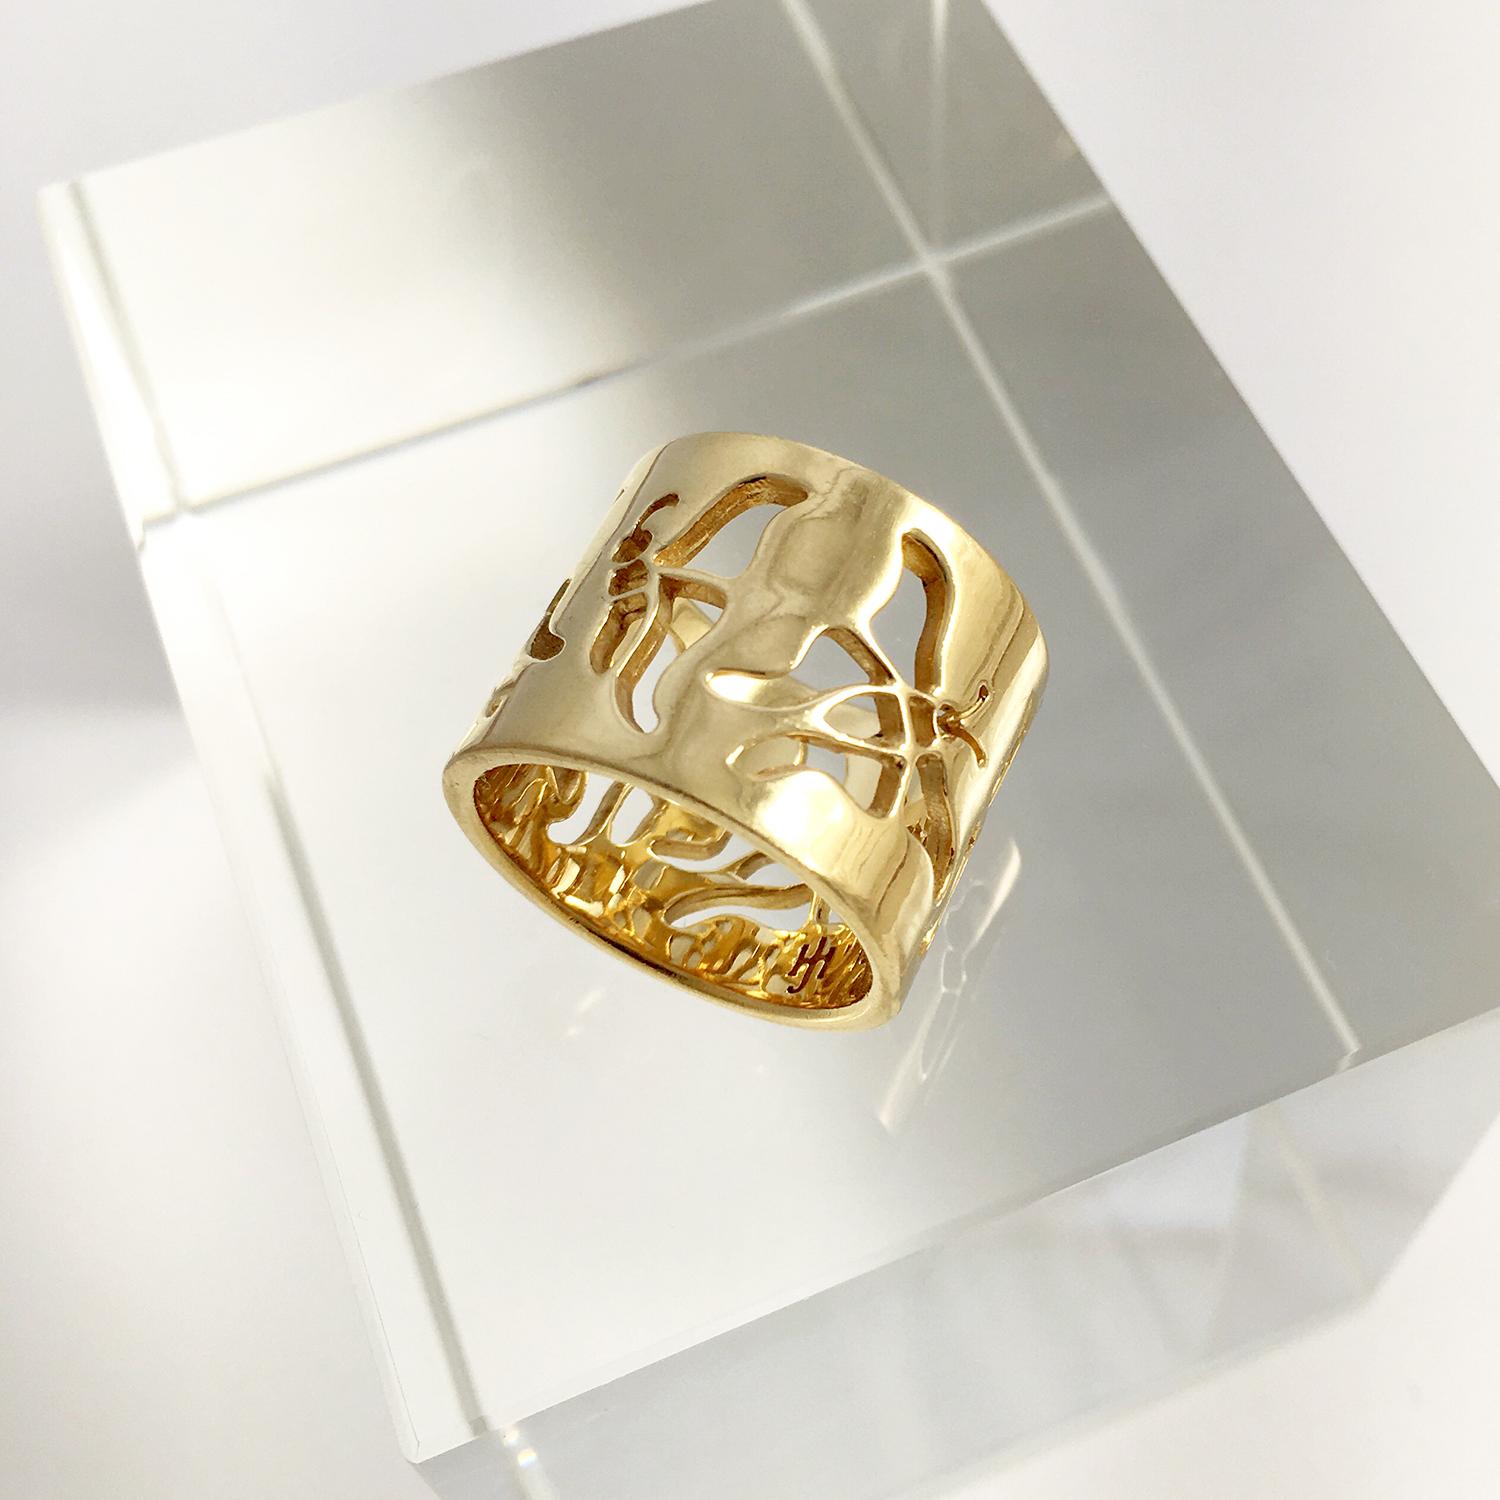 Introducing our mesmerizing Butterfly Ring in yellow gold, a symbol of elegance and grace that captures the beauty of nature. Crafted from 14k bright yellow gold, this enchanting ring showcases cut-out butterflies that encircle the band, creating a